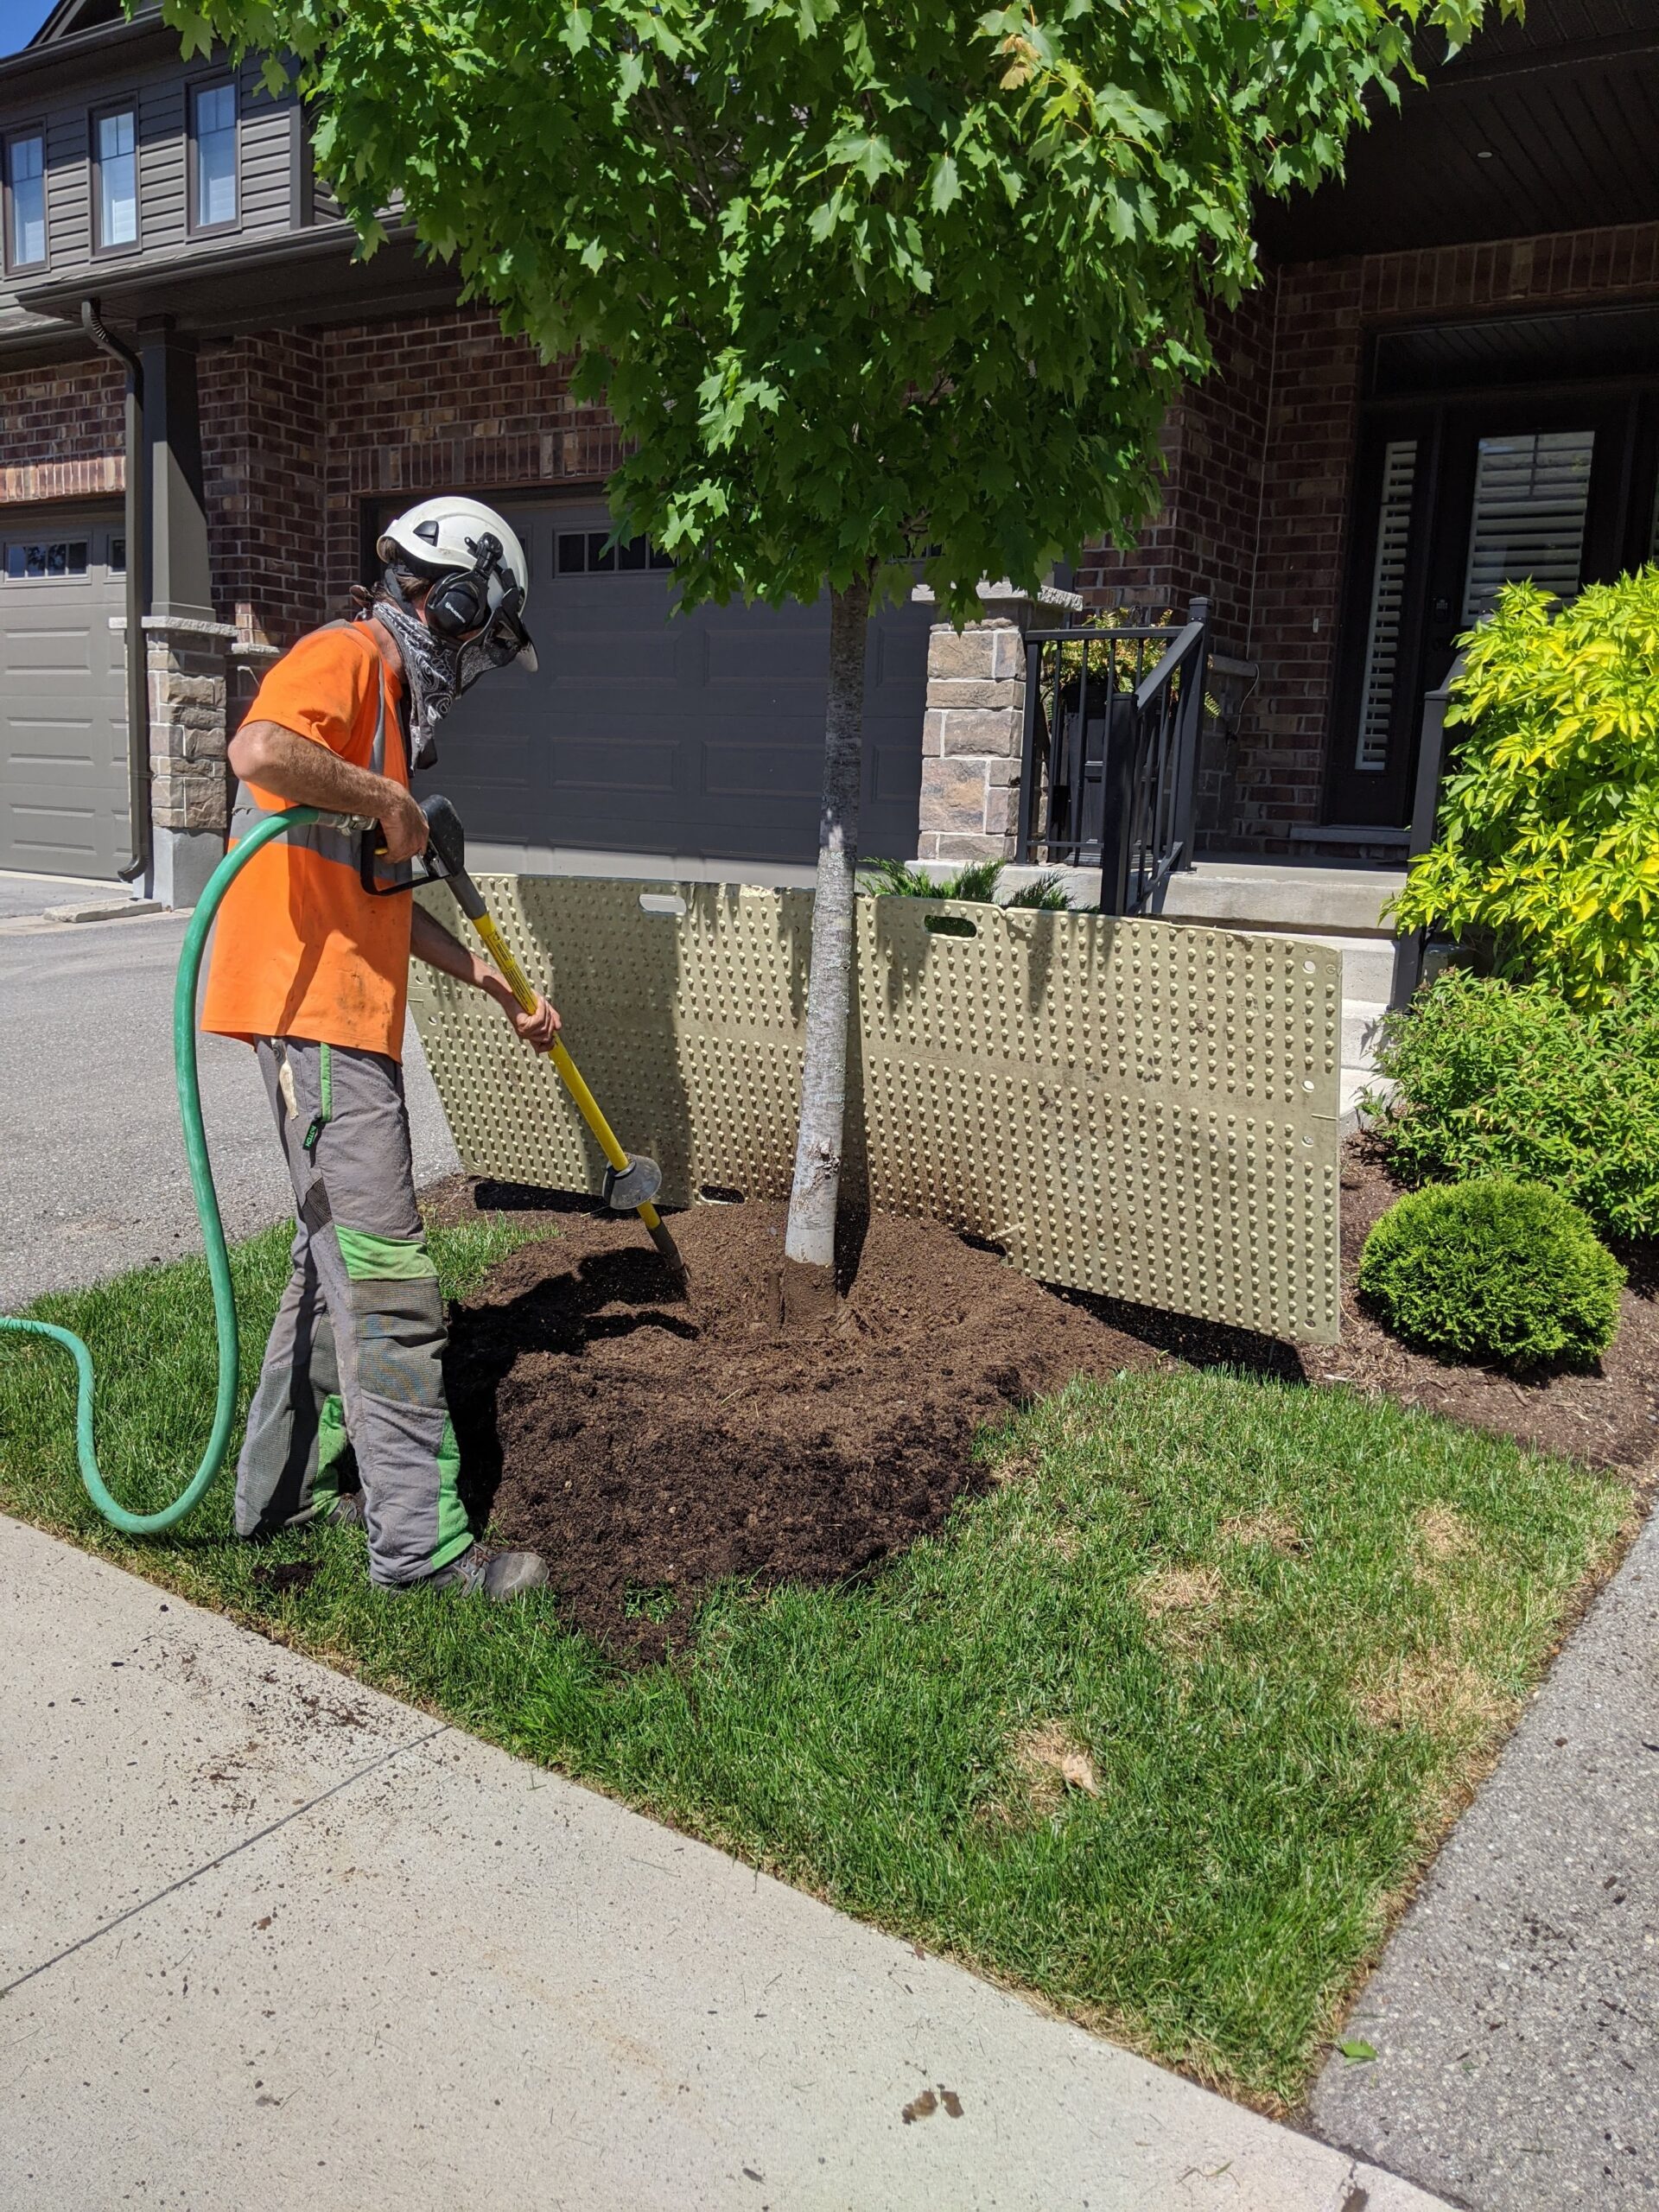 allgreen tree service worker with air spade tending soil